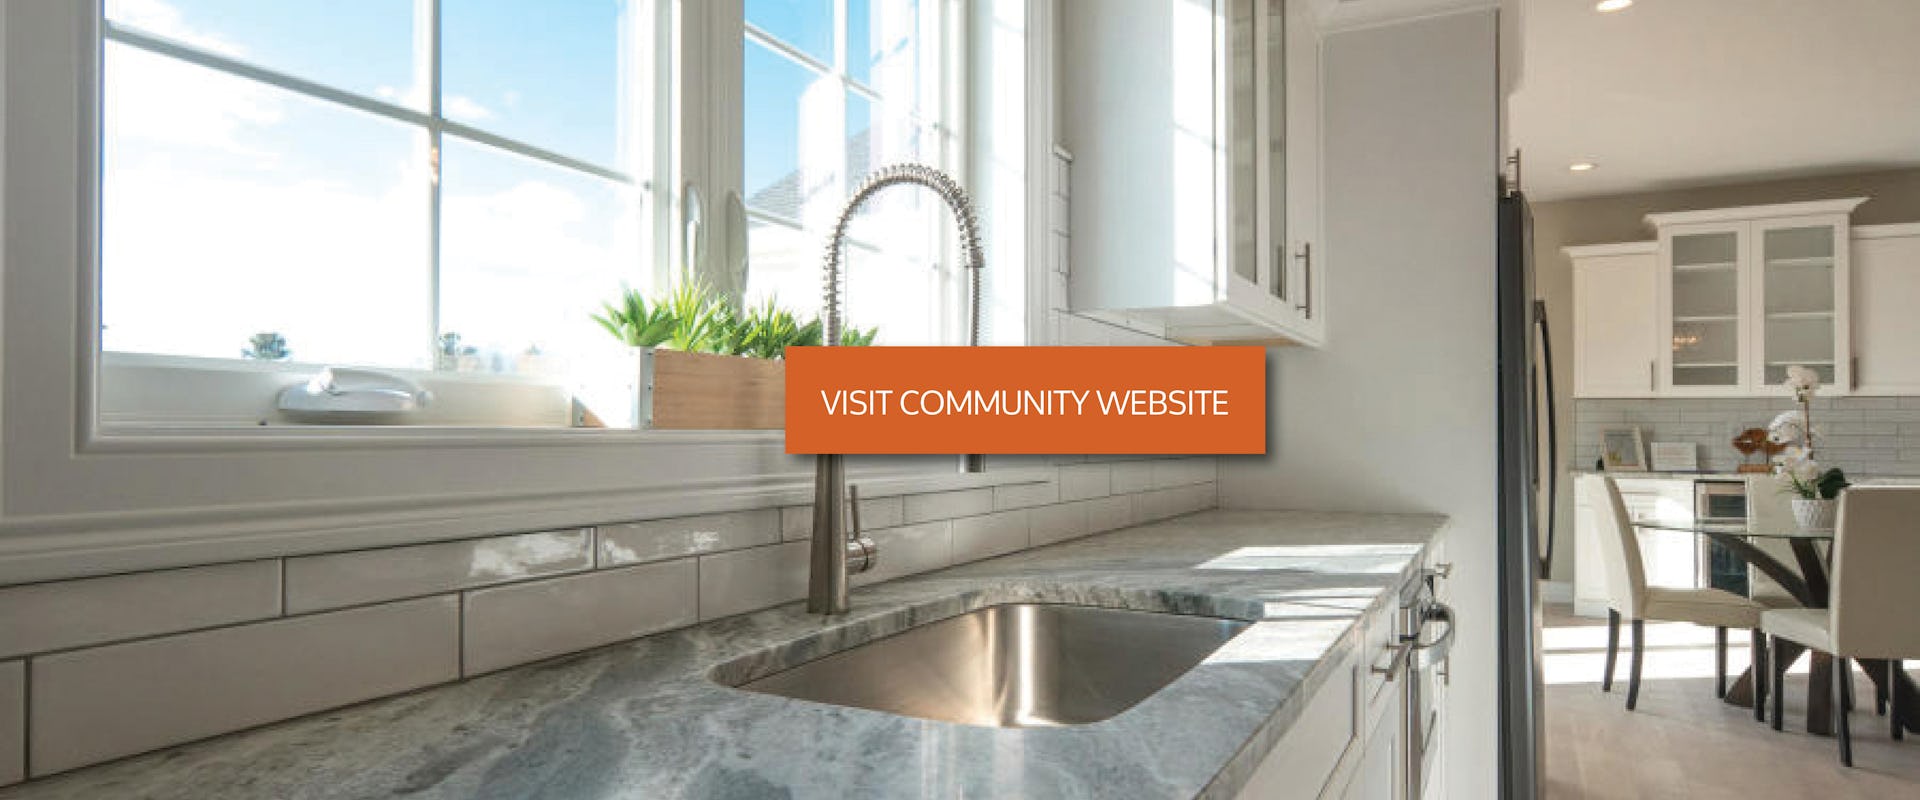 new home kitchen sink with visit community website button